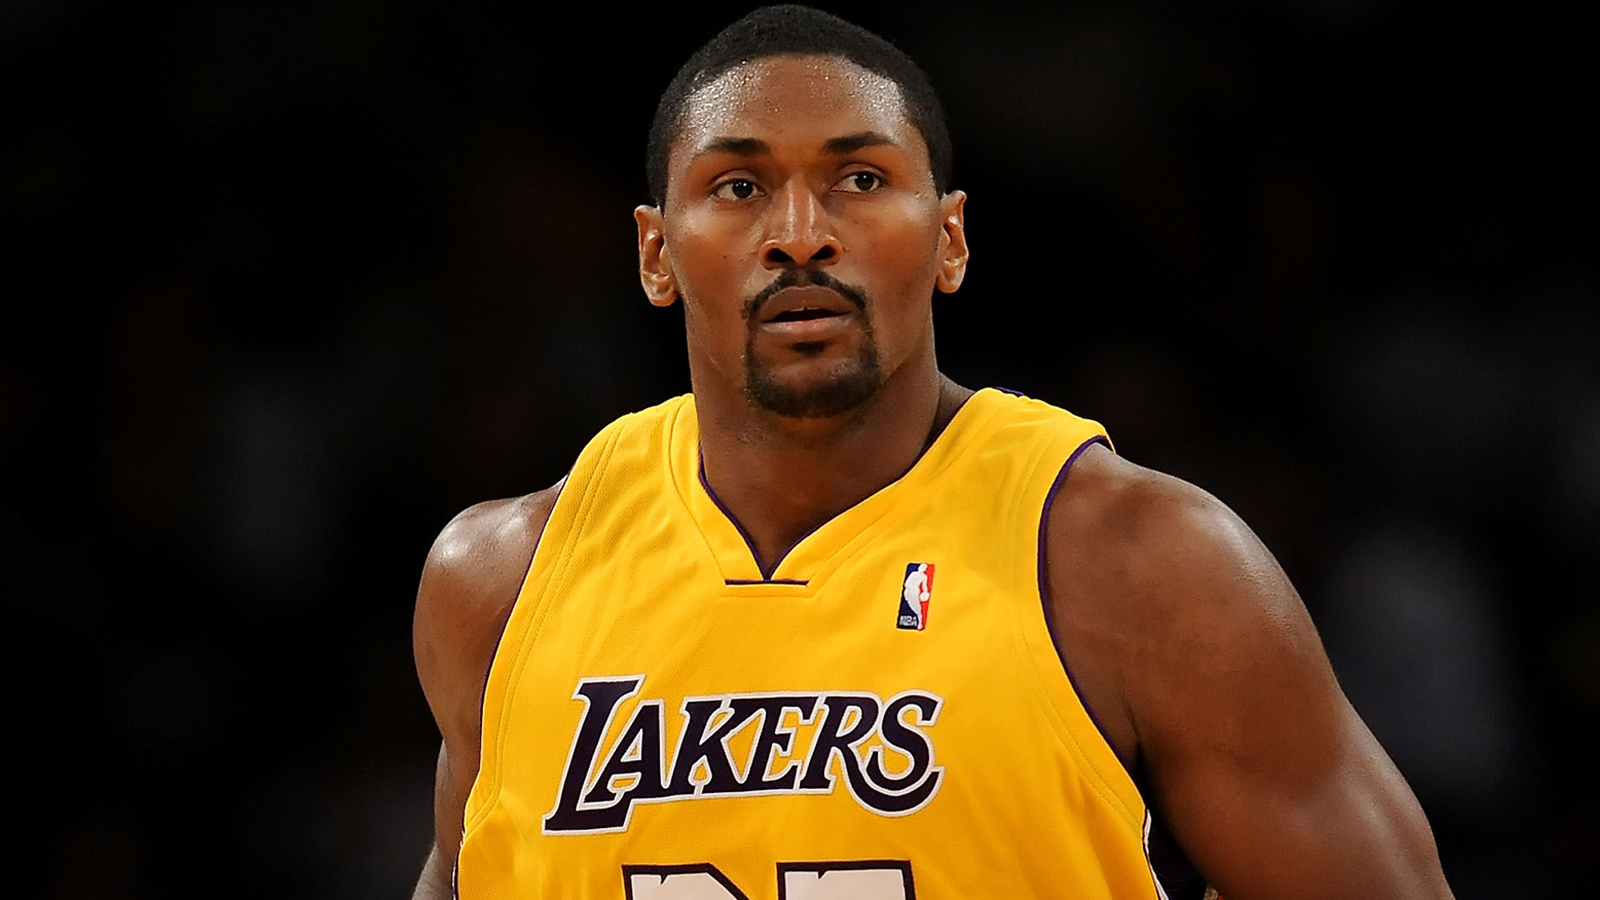 Ron Artest's Friend Was Killed With A Table Leg During A Game